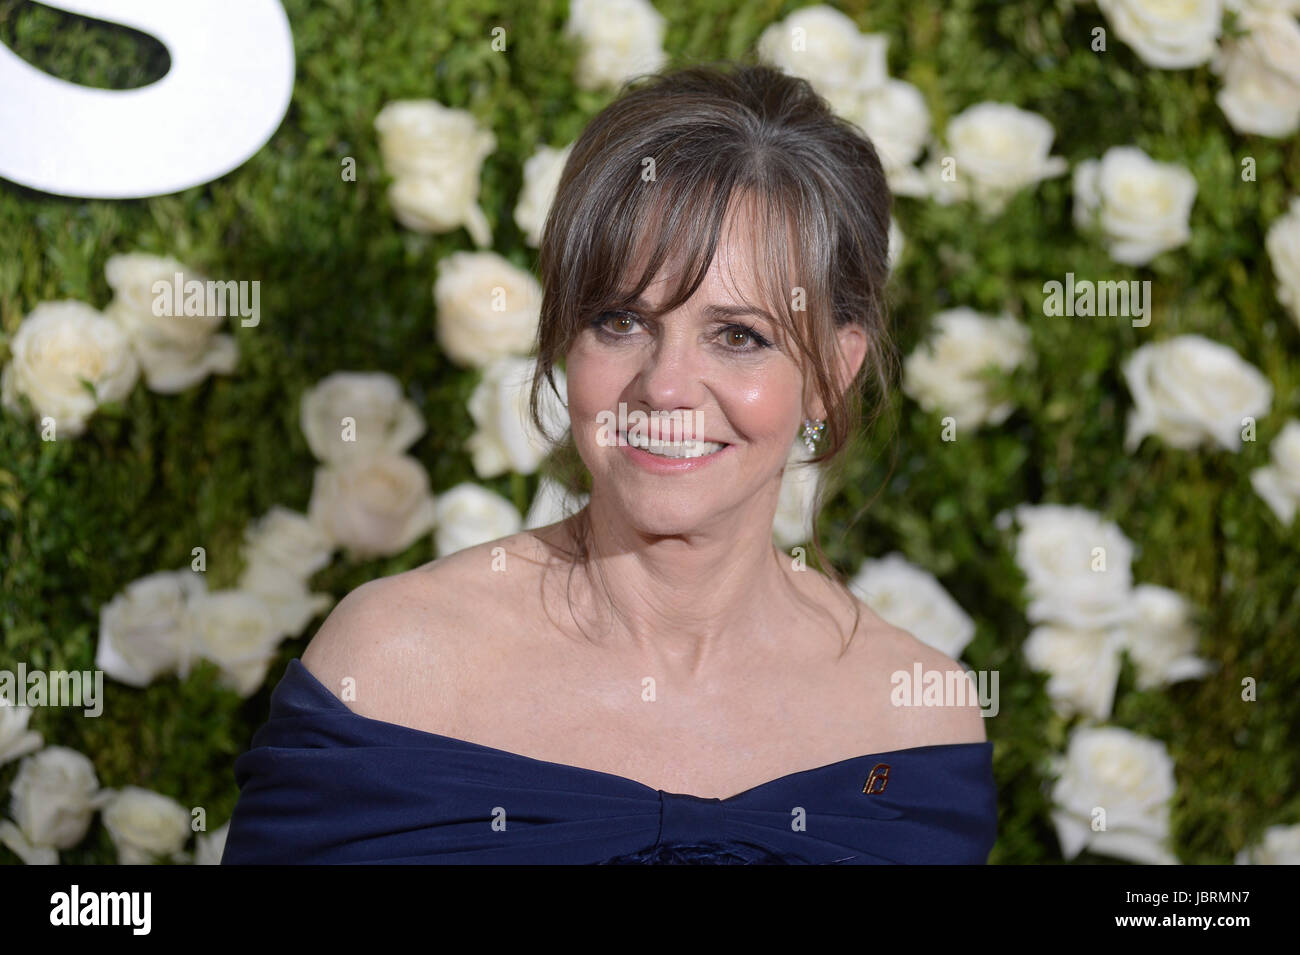 New York, USA. 11th Jun, 2017. Sally Field attends the 2017 Tony Awards at Radio City Music Hall on June 11, 2017 in New York City. Credit: Erik Pendzich/Alamy Live News Stock Photo